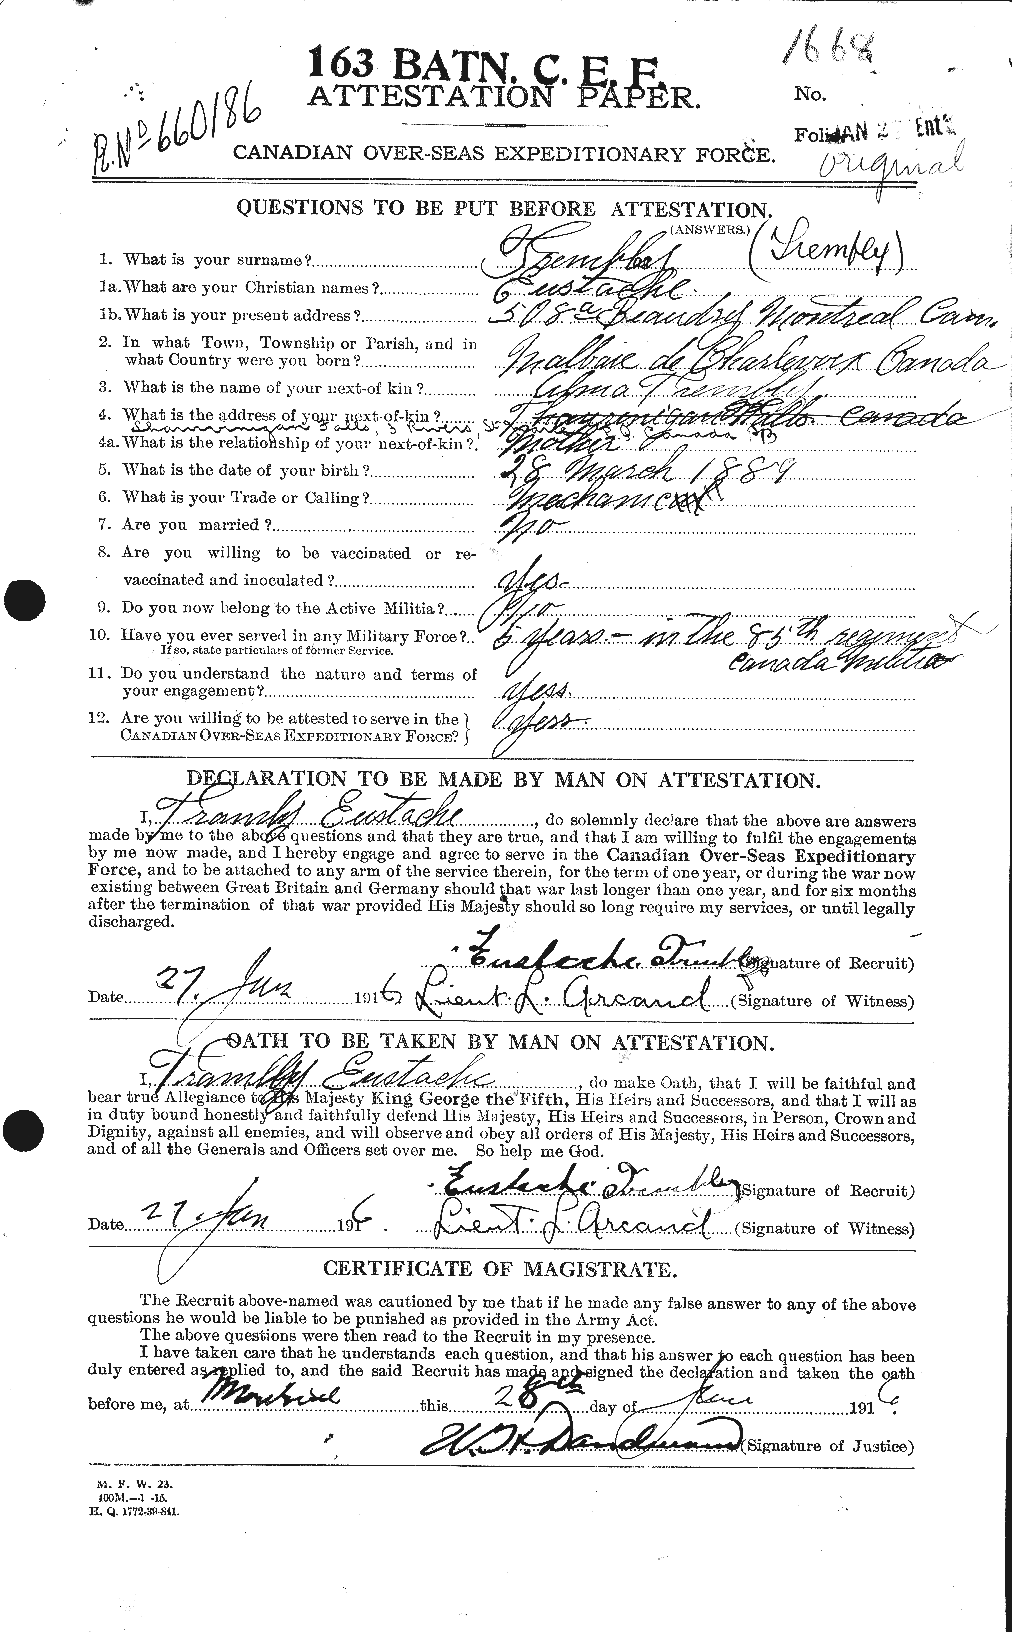 Personnel Records of the First World War - CEF 638387a